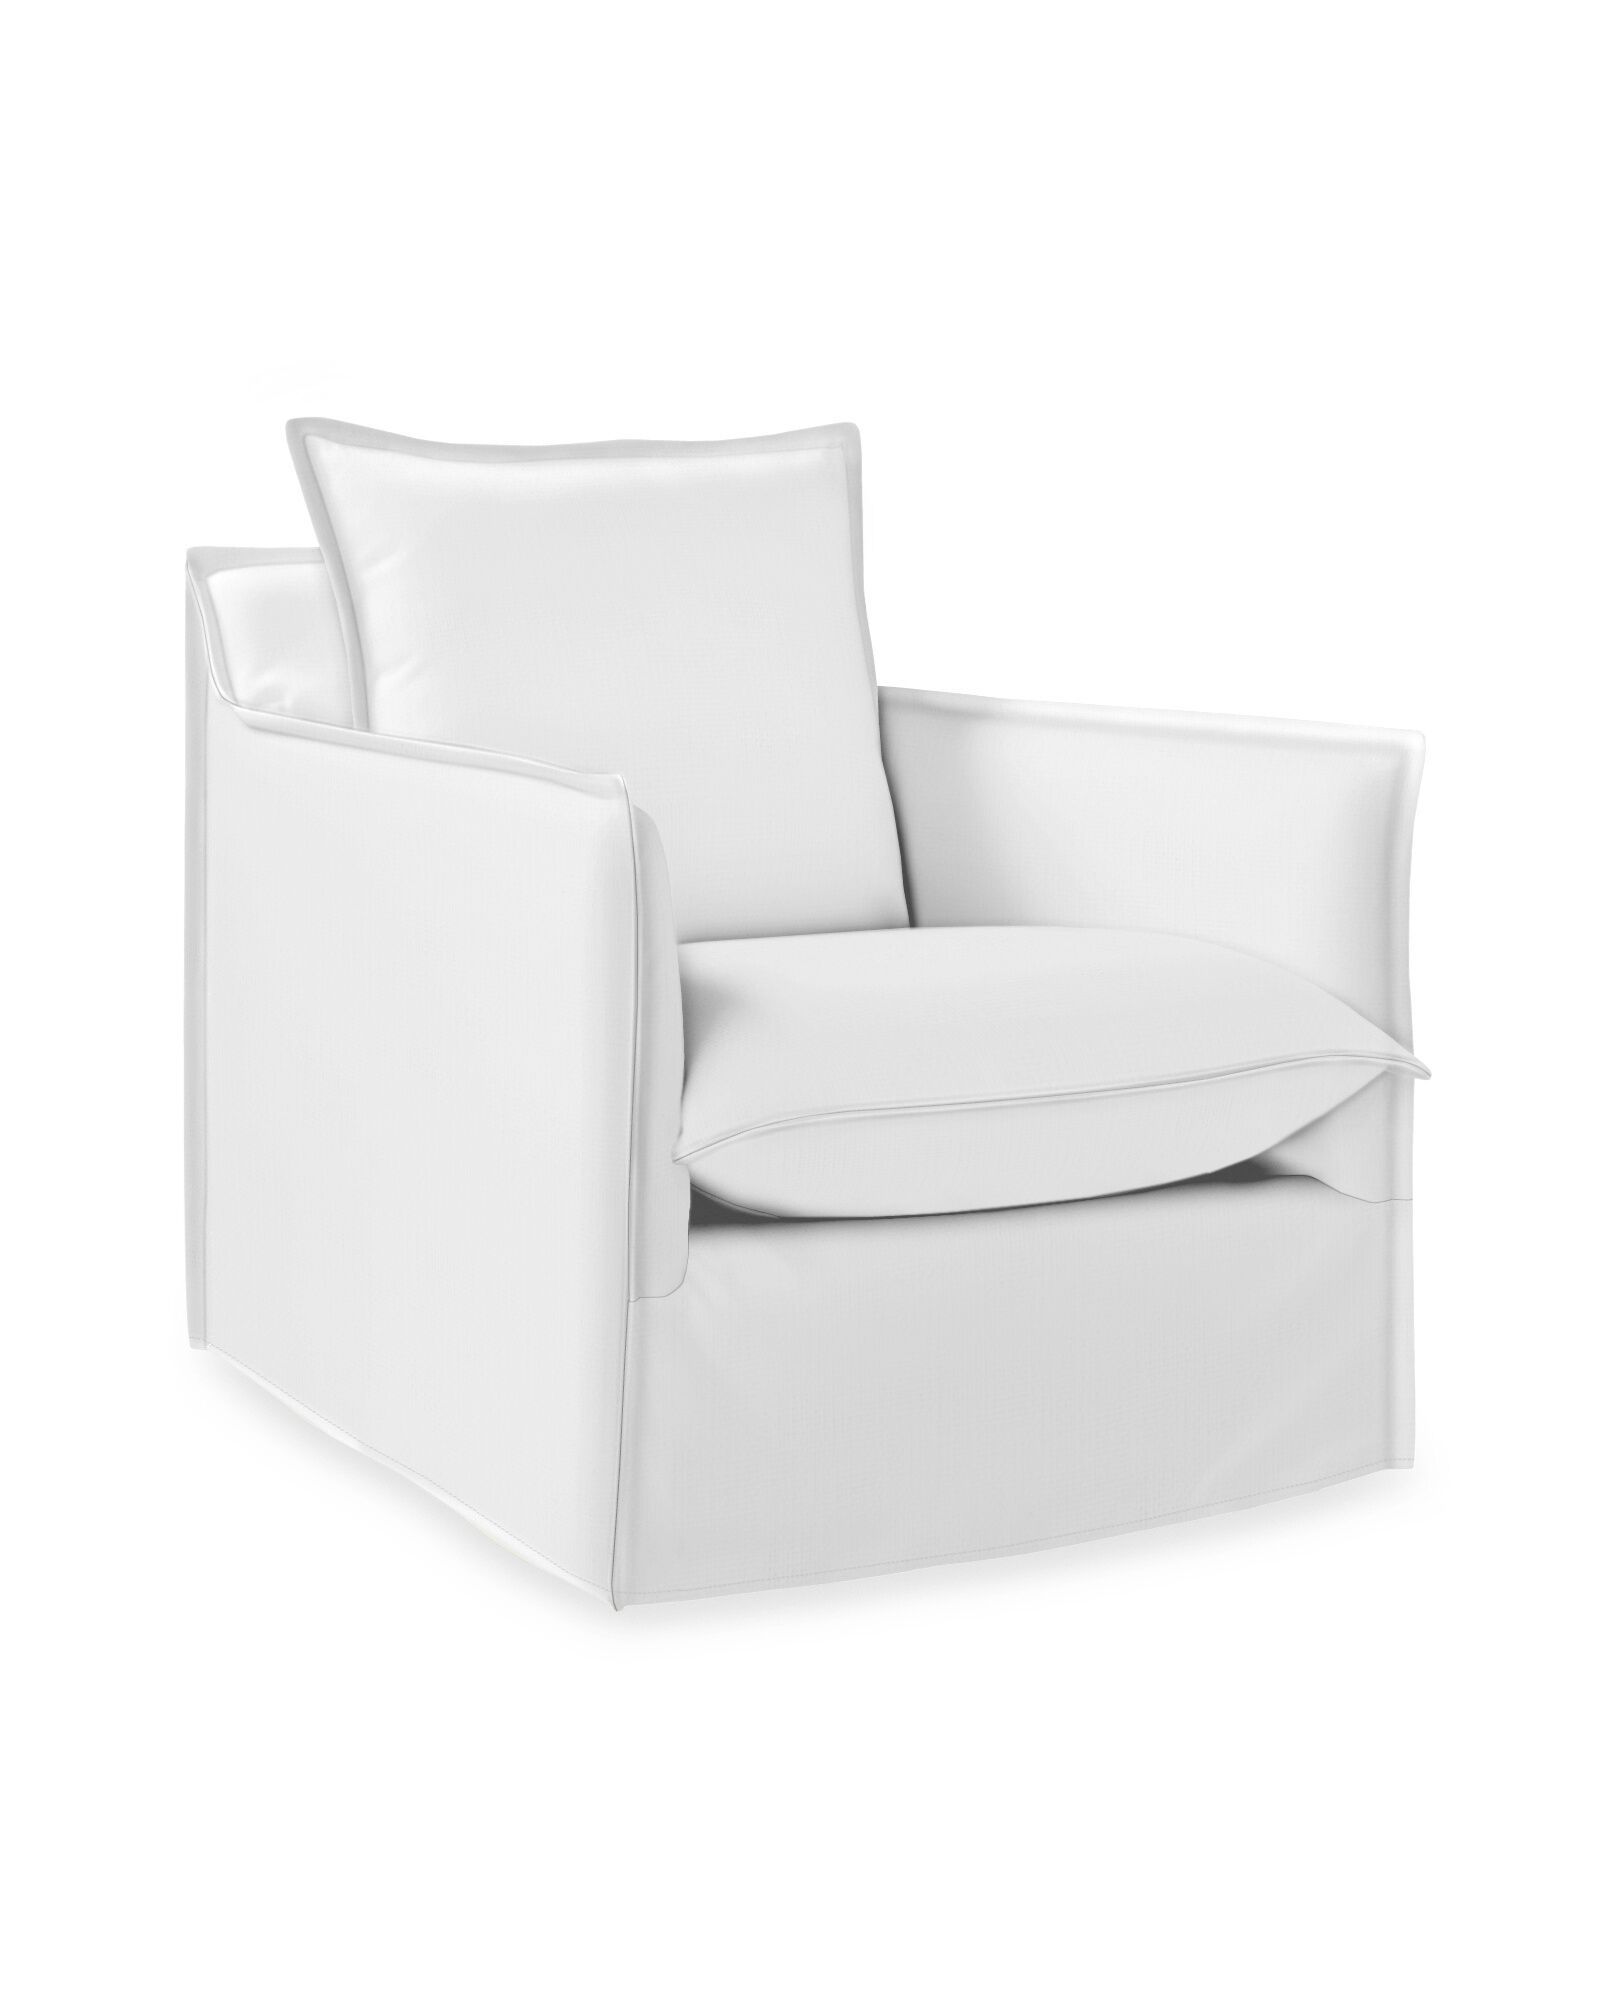 Sundial Outdoor Swivel Chair - Slipcovered | Serena and Lily